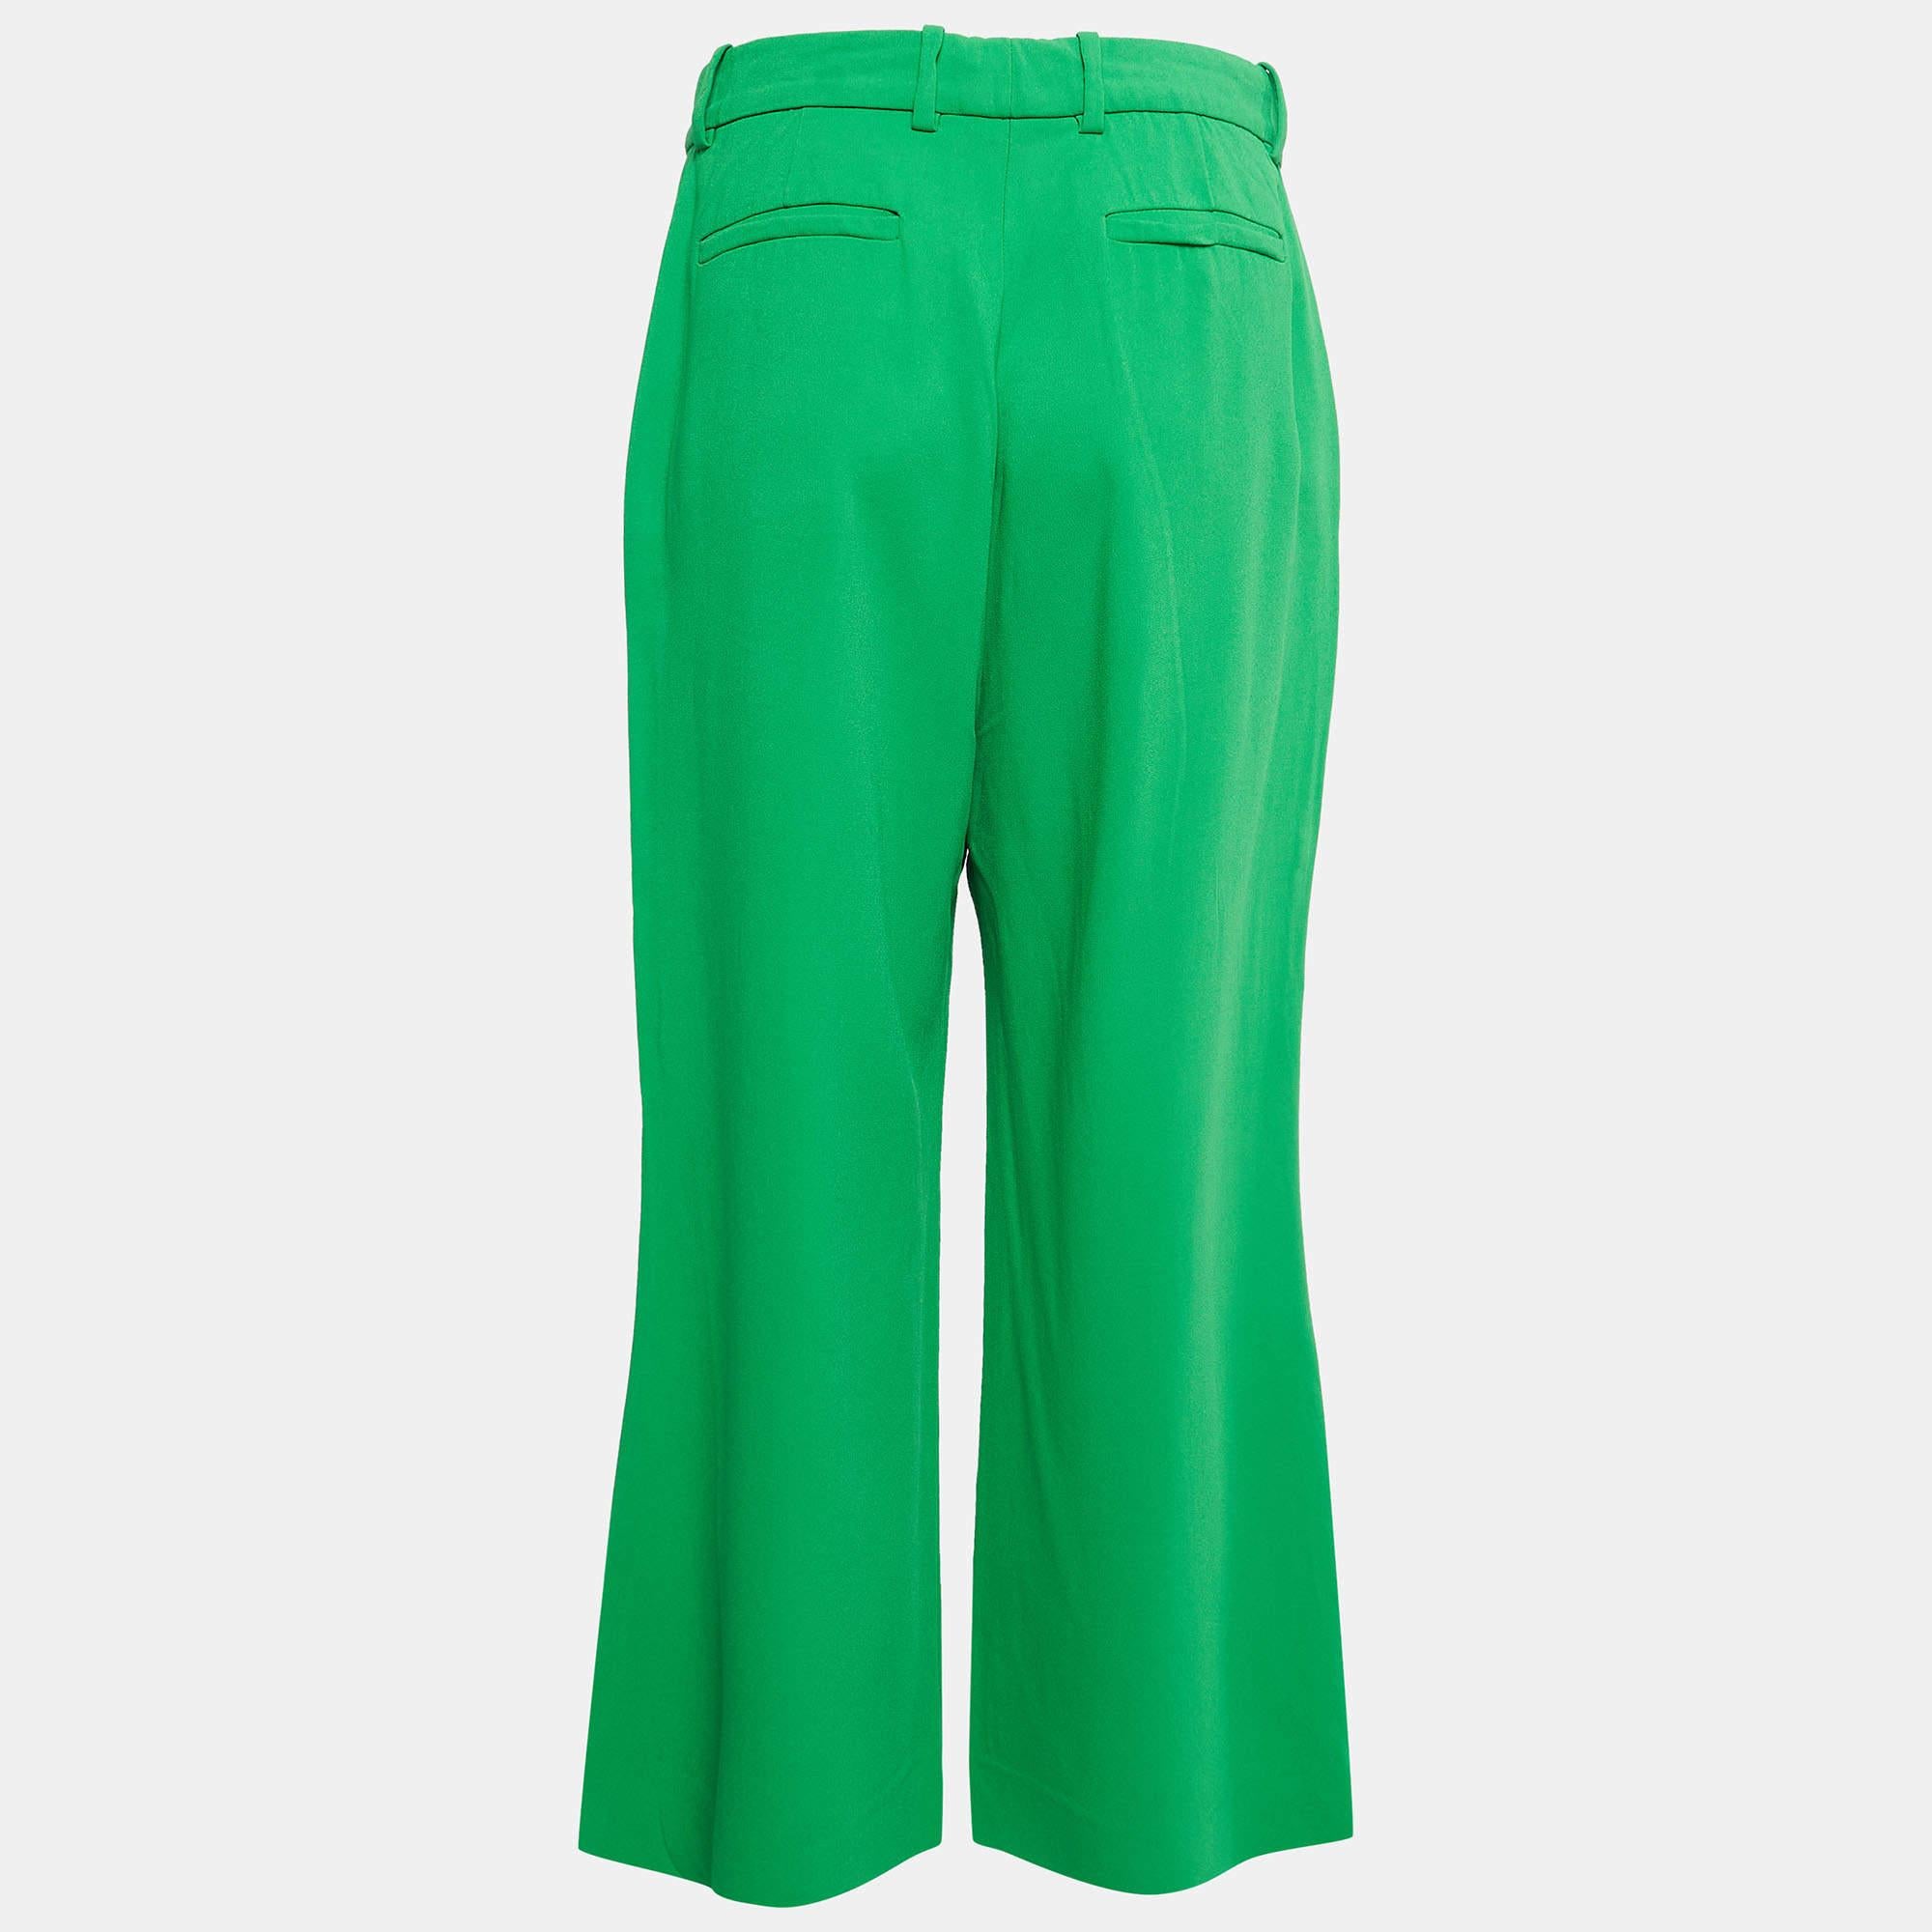 The Gucci culotte pants exude sophistication with their tailored silhouette and vibrant green hue. Crafted from high-quality stretch crepe fabric, they feature a flattering wide leg and stylish button detailing, making them a chic wardrobe essential